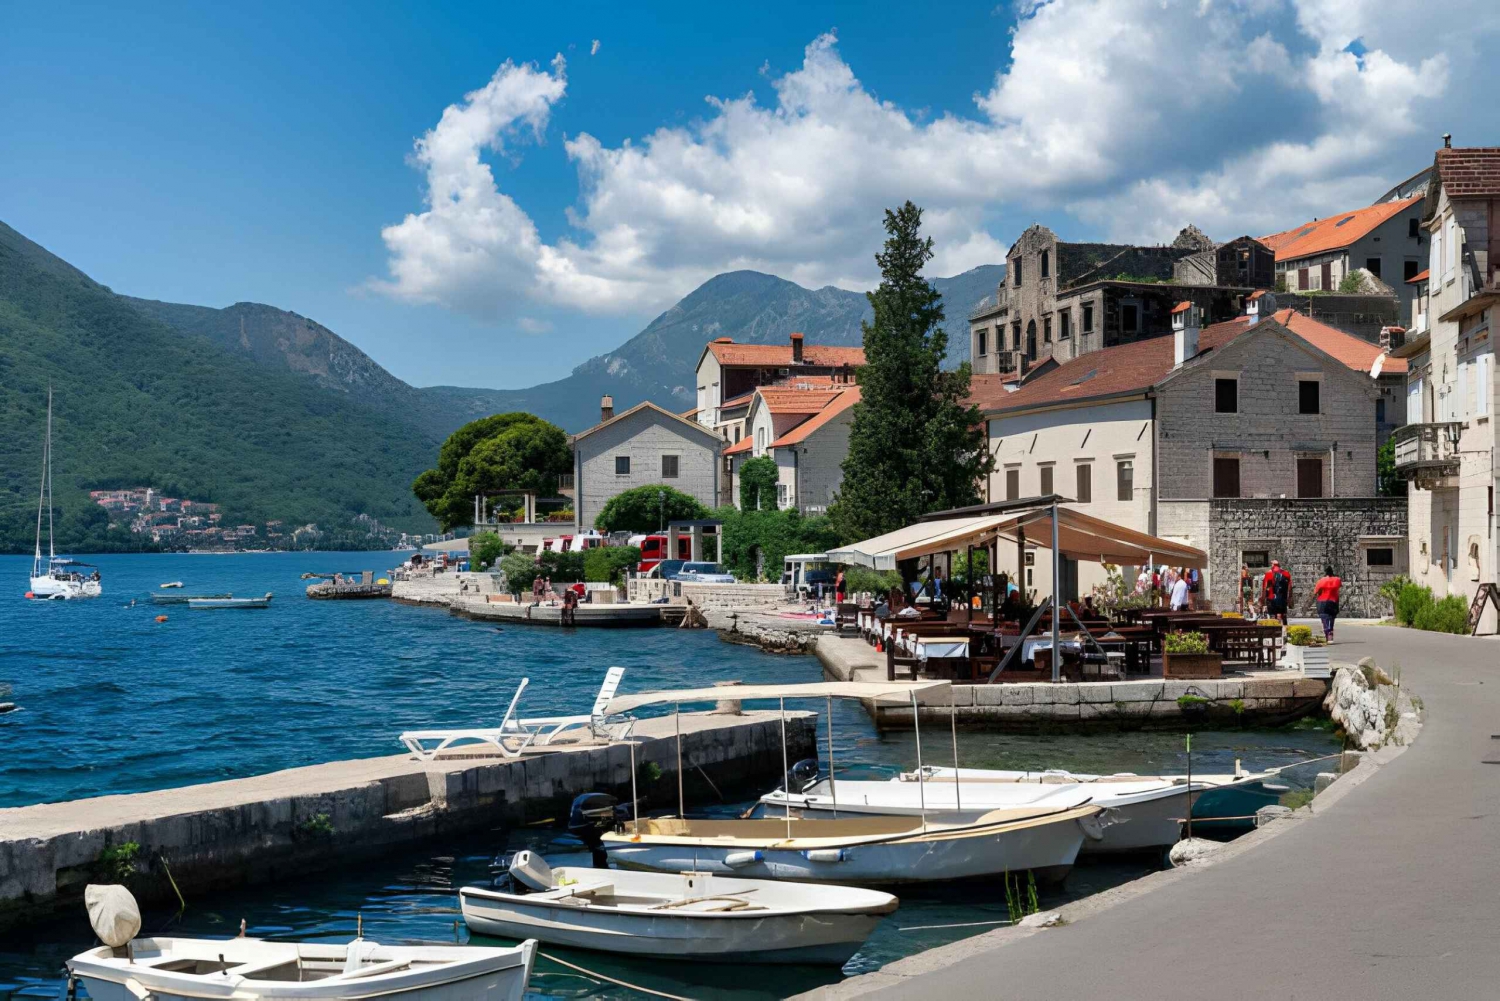 Discover unique Montenegro 3 days 4 nights (full package)